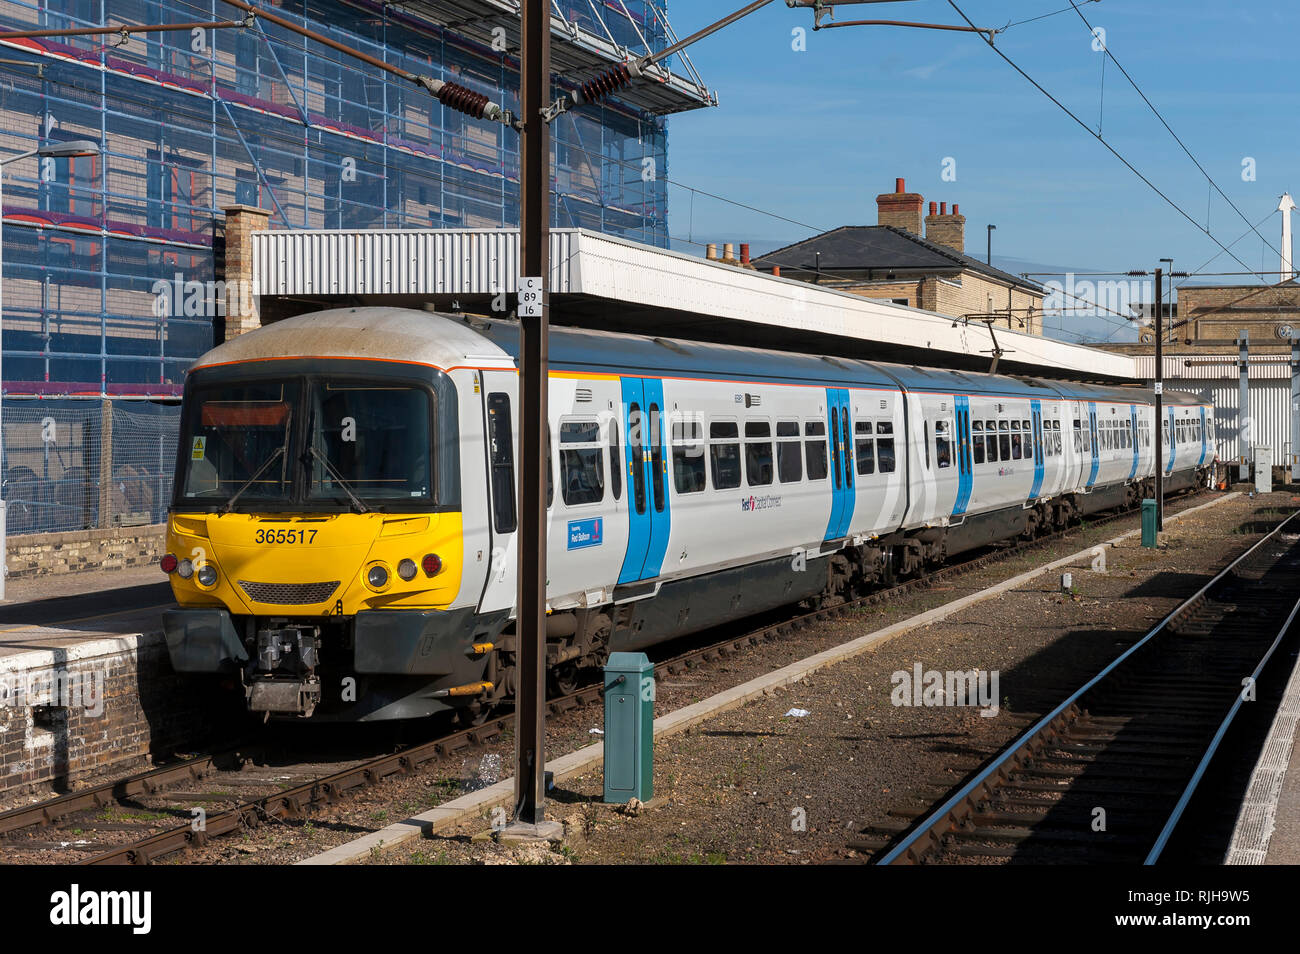 Class 365 Networker Express dual voltage electric multiple unit train in First Capital Connect livery waiting at a station in the UK. Stock Photo